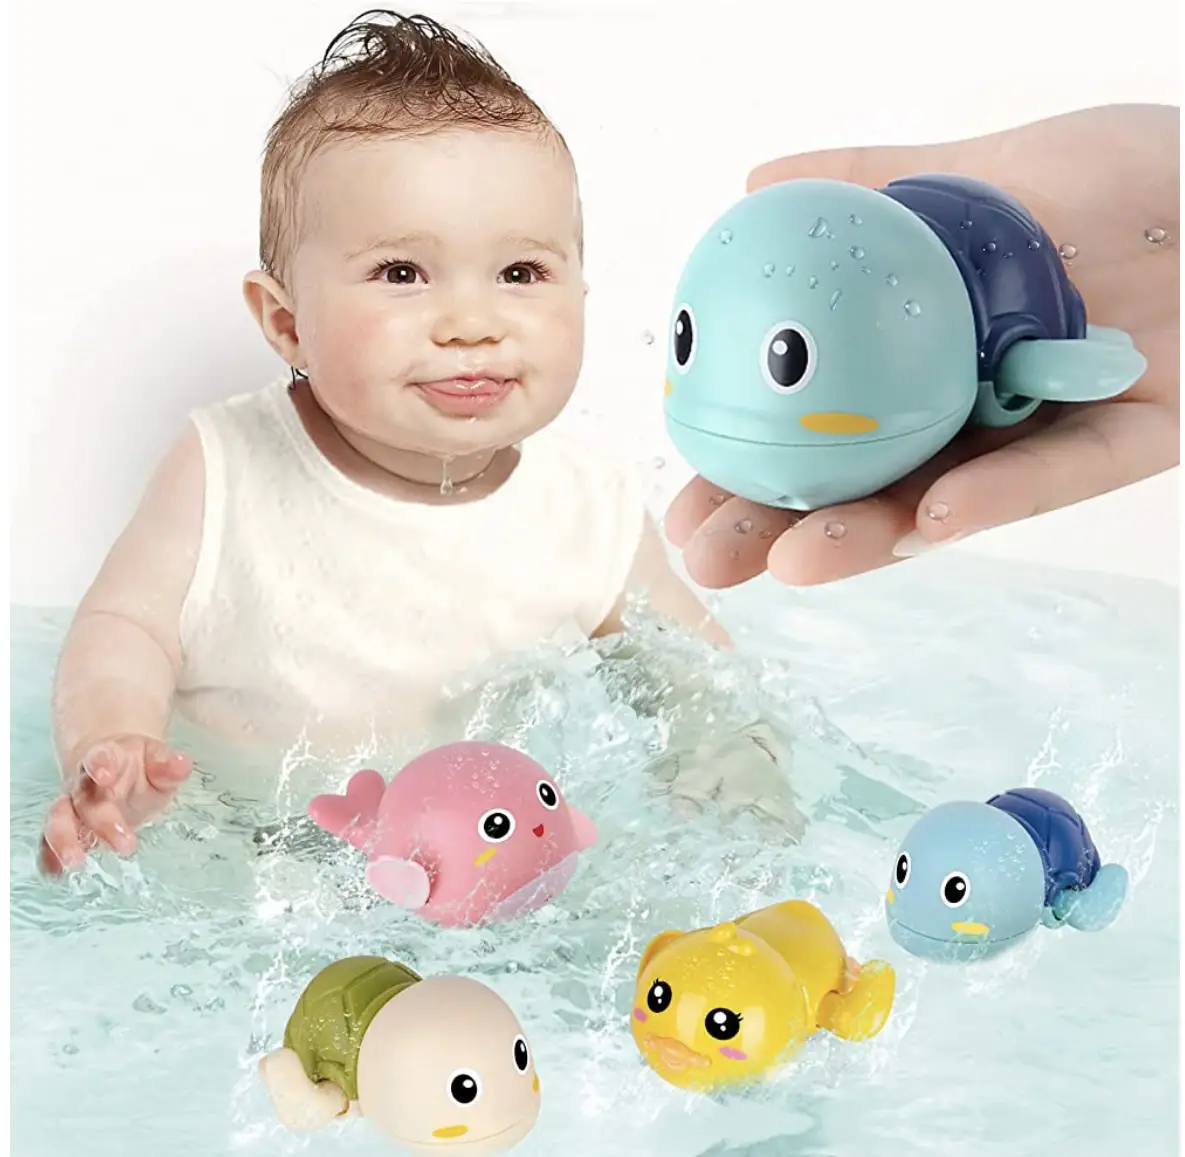 Favorite bath toys for kids, Gallery posted by Adrianna ✨